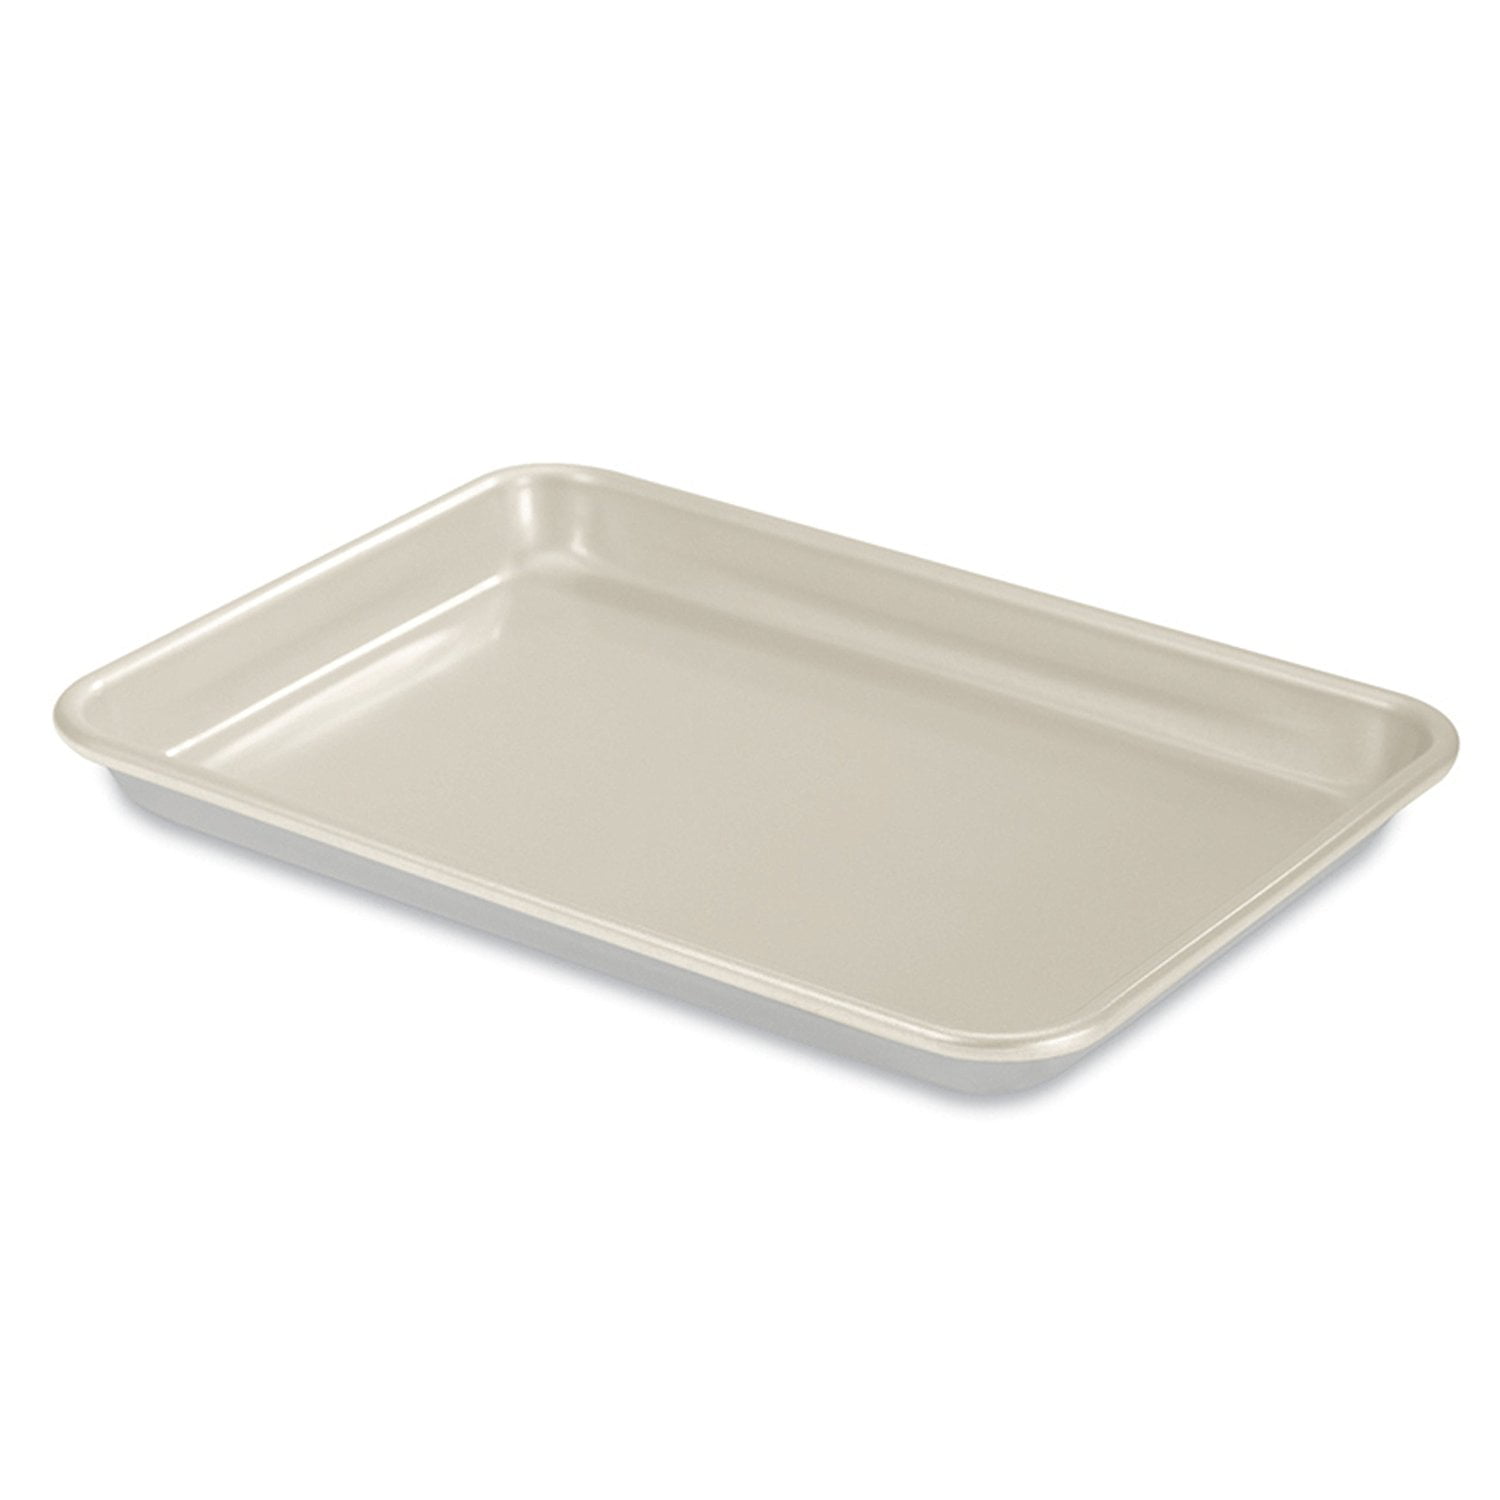 Details about   Nordic Ware Bakers Quarter Sheet 2-Pack Natural 